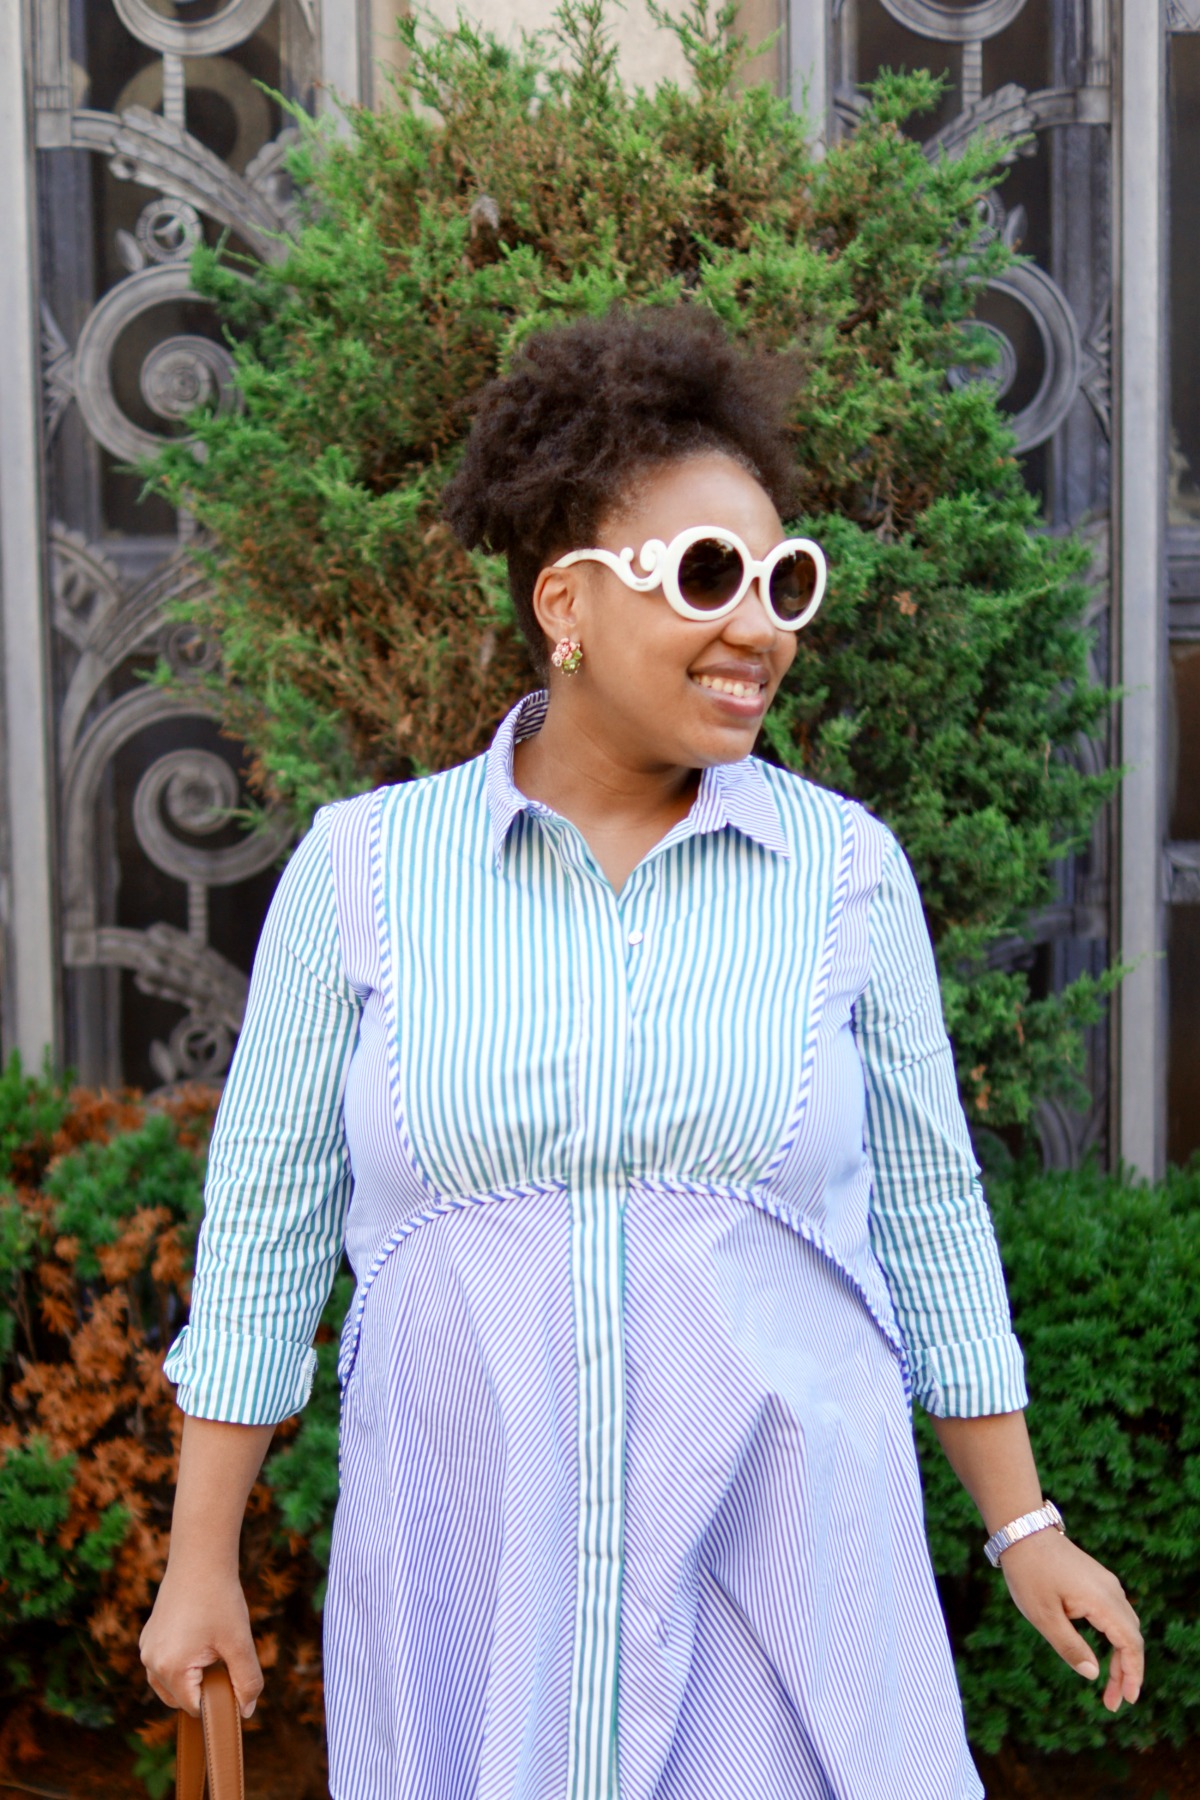 Closet Confections - Page 2 of 409 - NYC Fashion and Lifestyle Blog